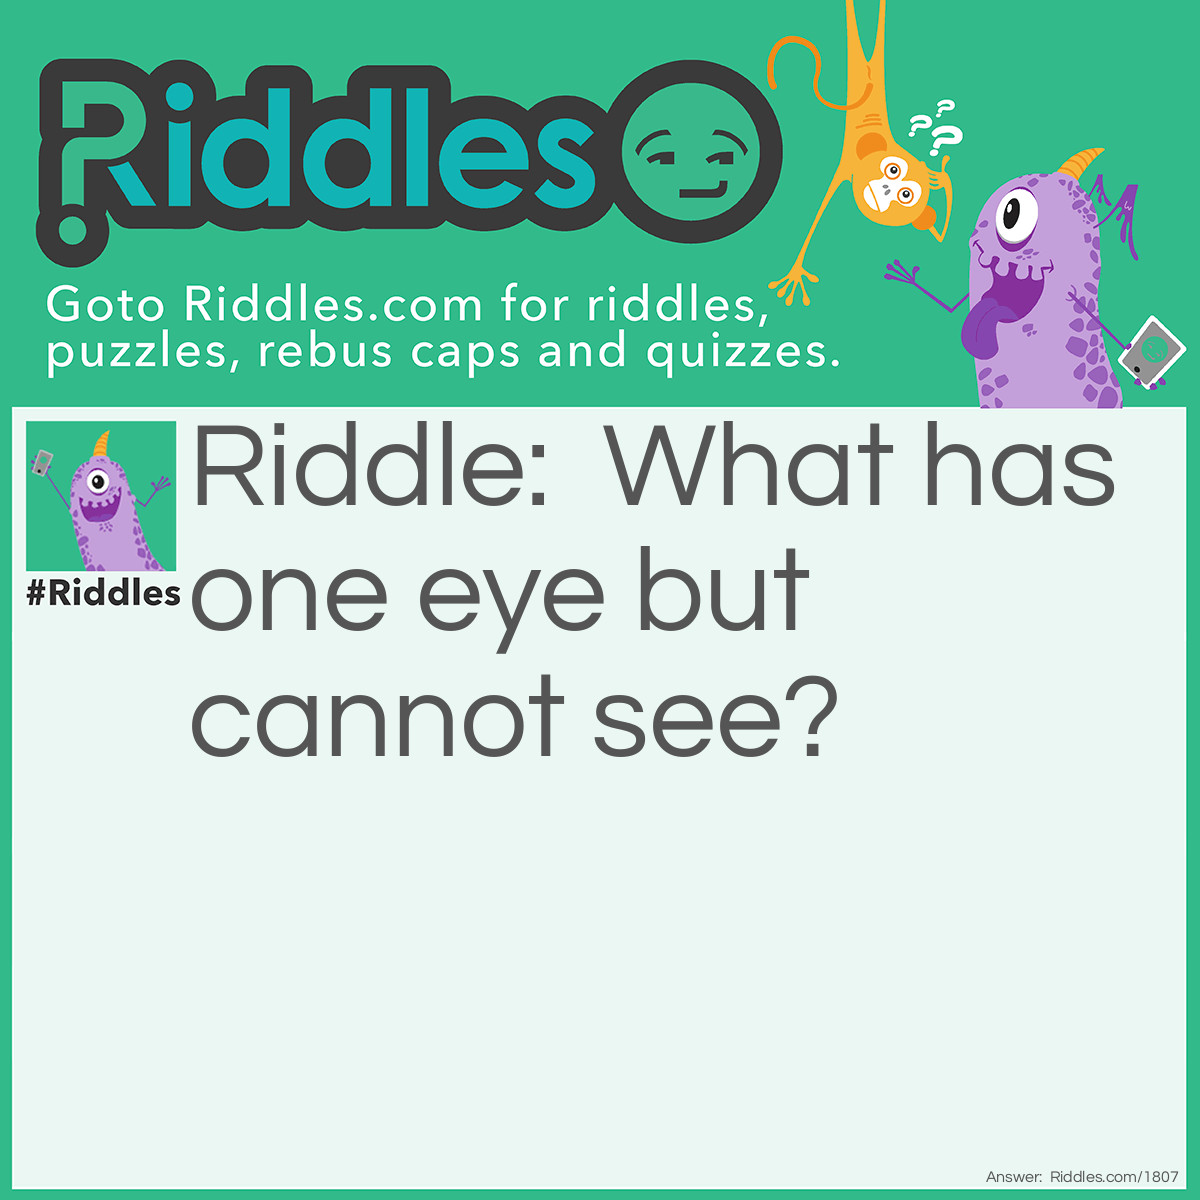 Riddle: I always have one eye open.
What am I? Answer: A needle